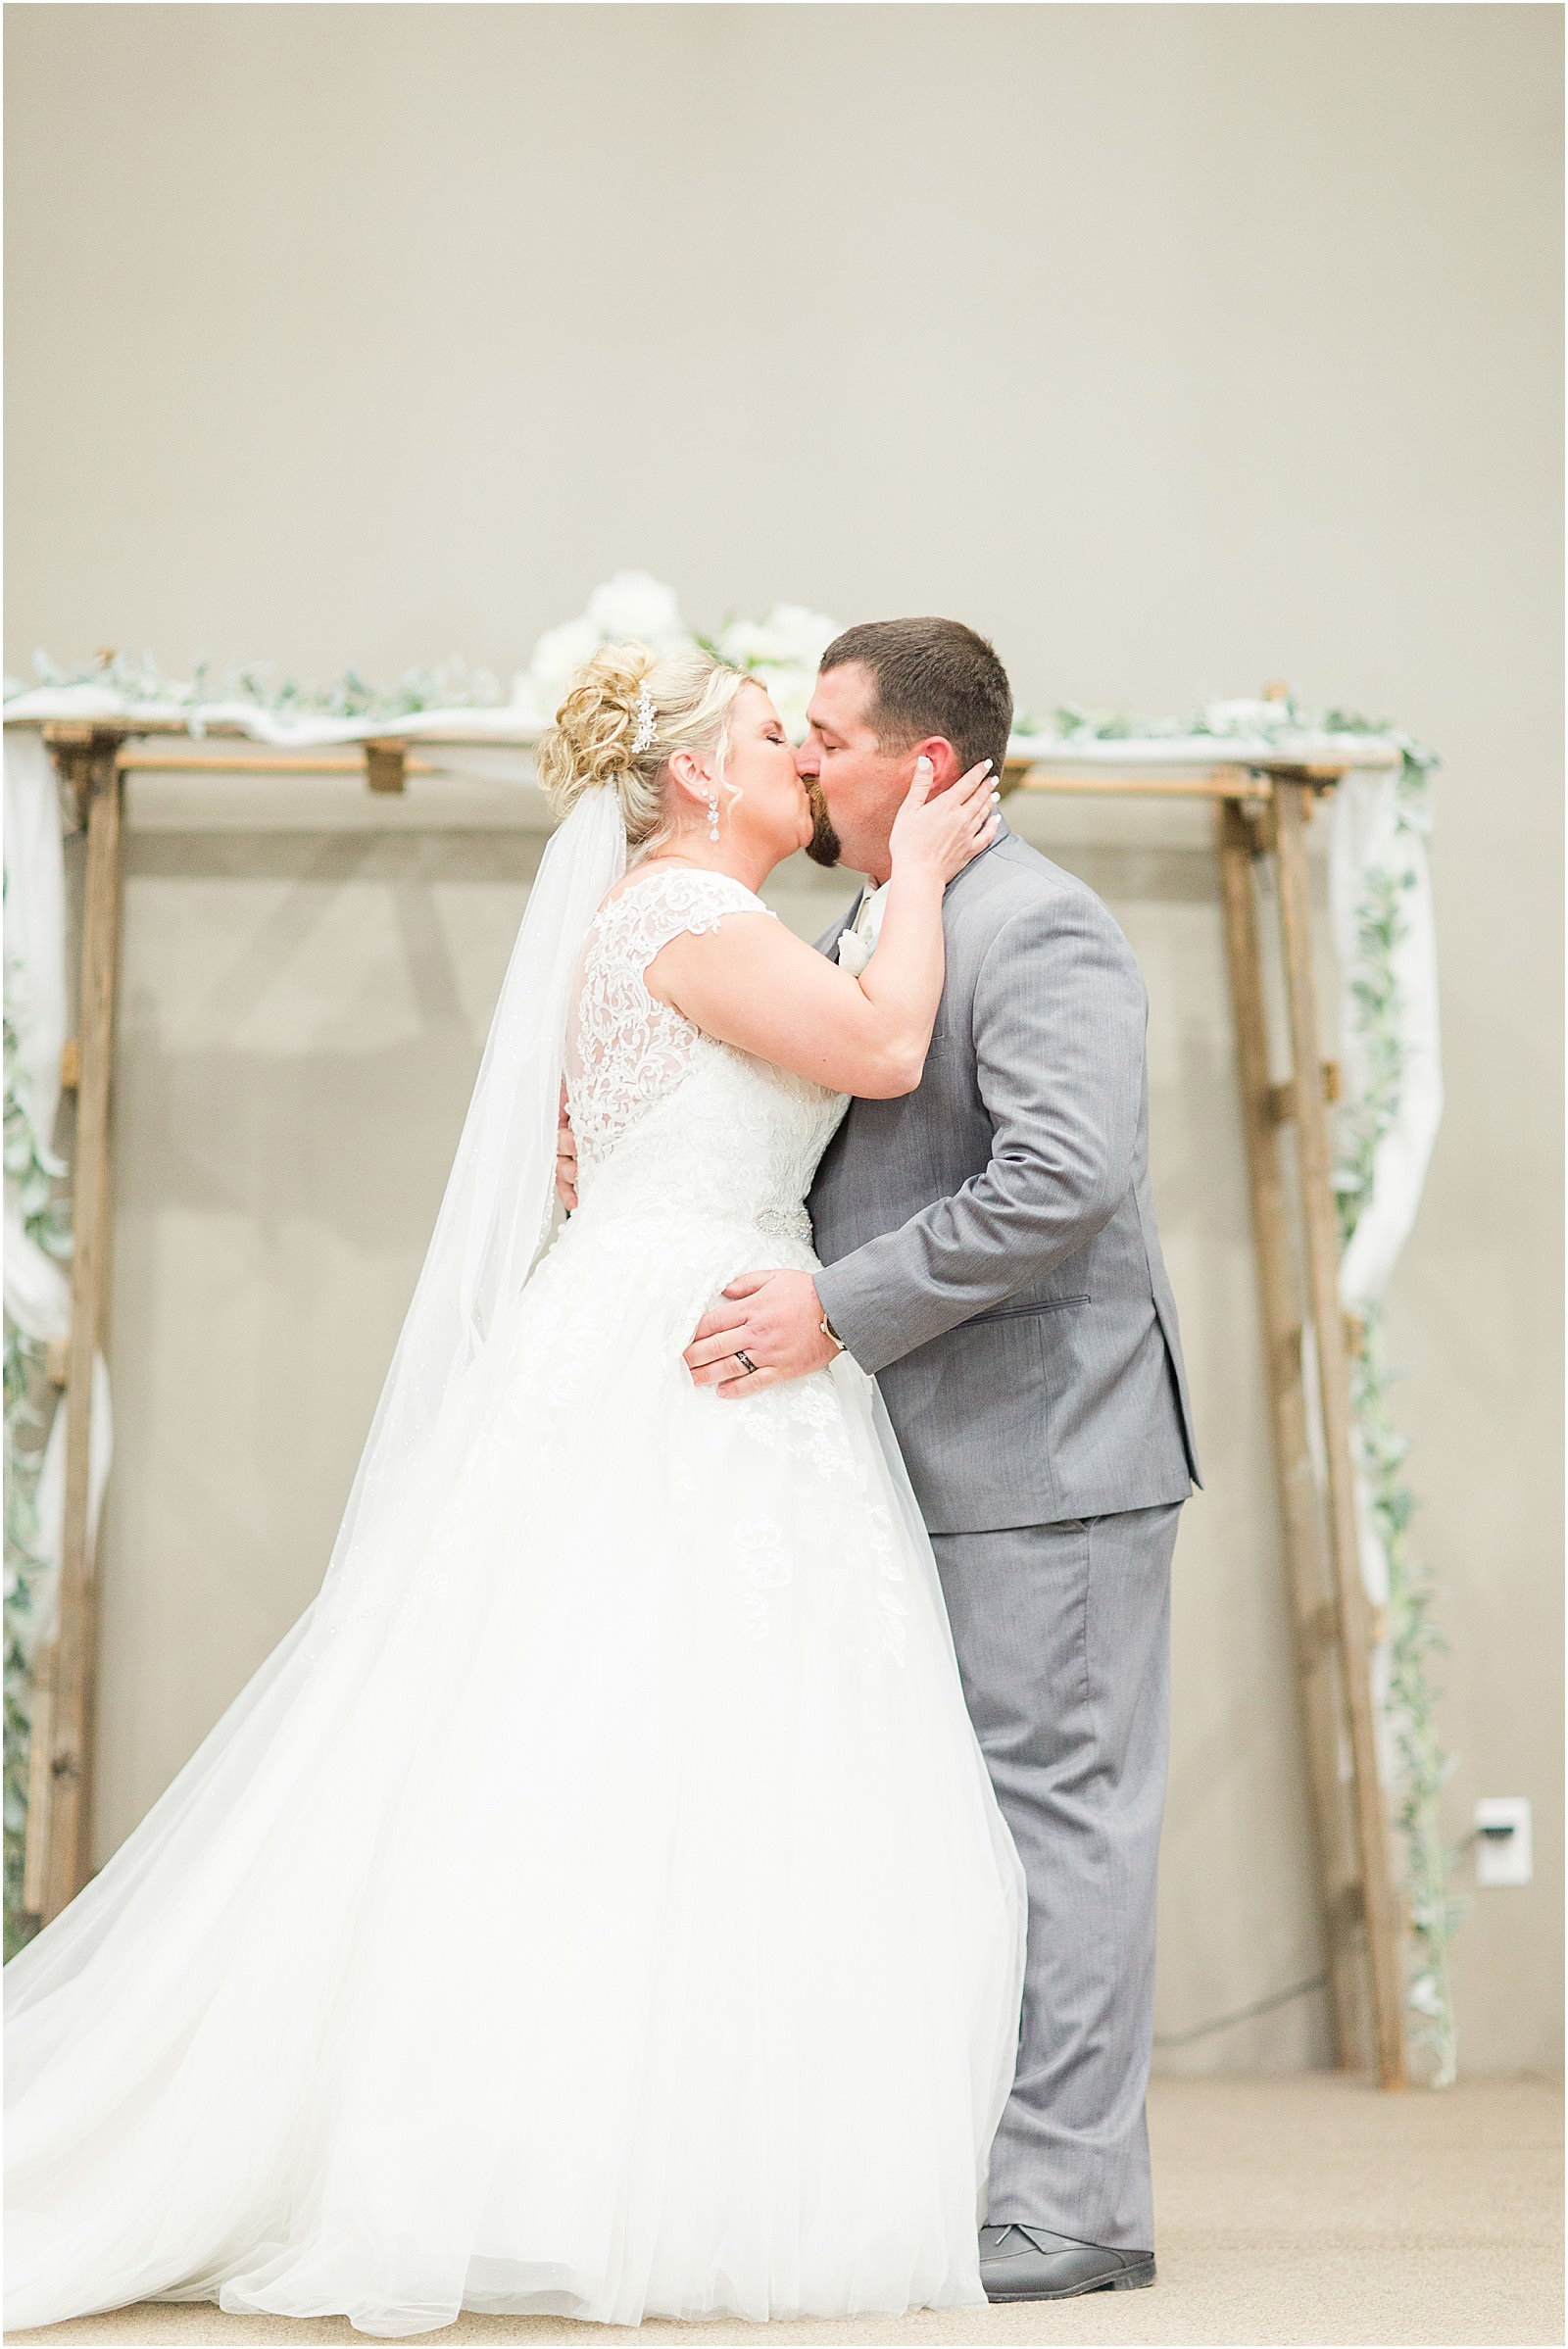 A Navy and Blush Wedding in Tell City Indiana | Brianna and Matt | Bret and Brandie Photography 0131.jpg